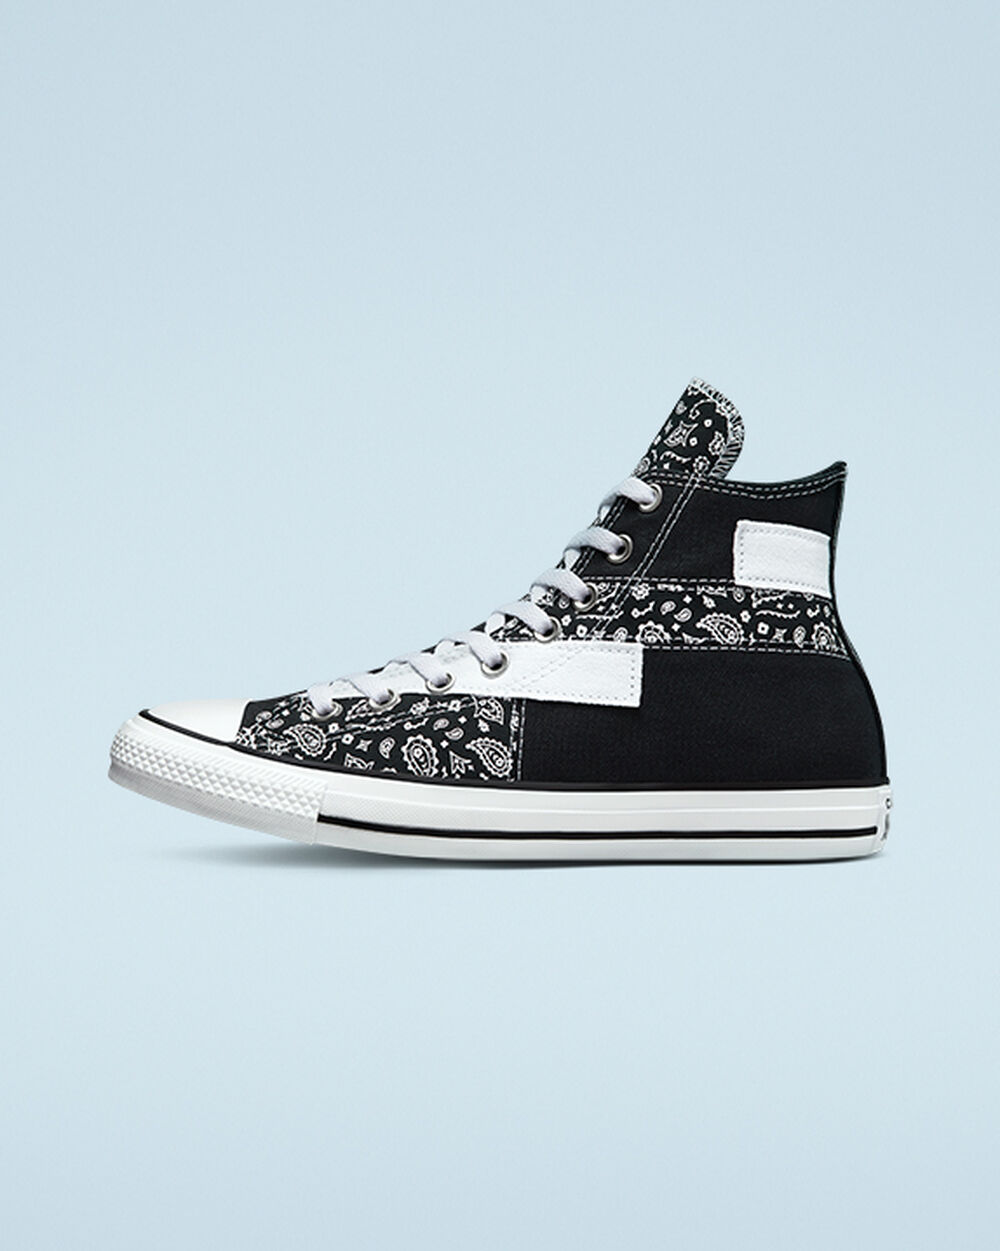 Tenis Converse Chuck Taylor All Star Mujer Negros Blancos Negros | Mexico-871646